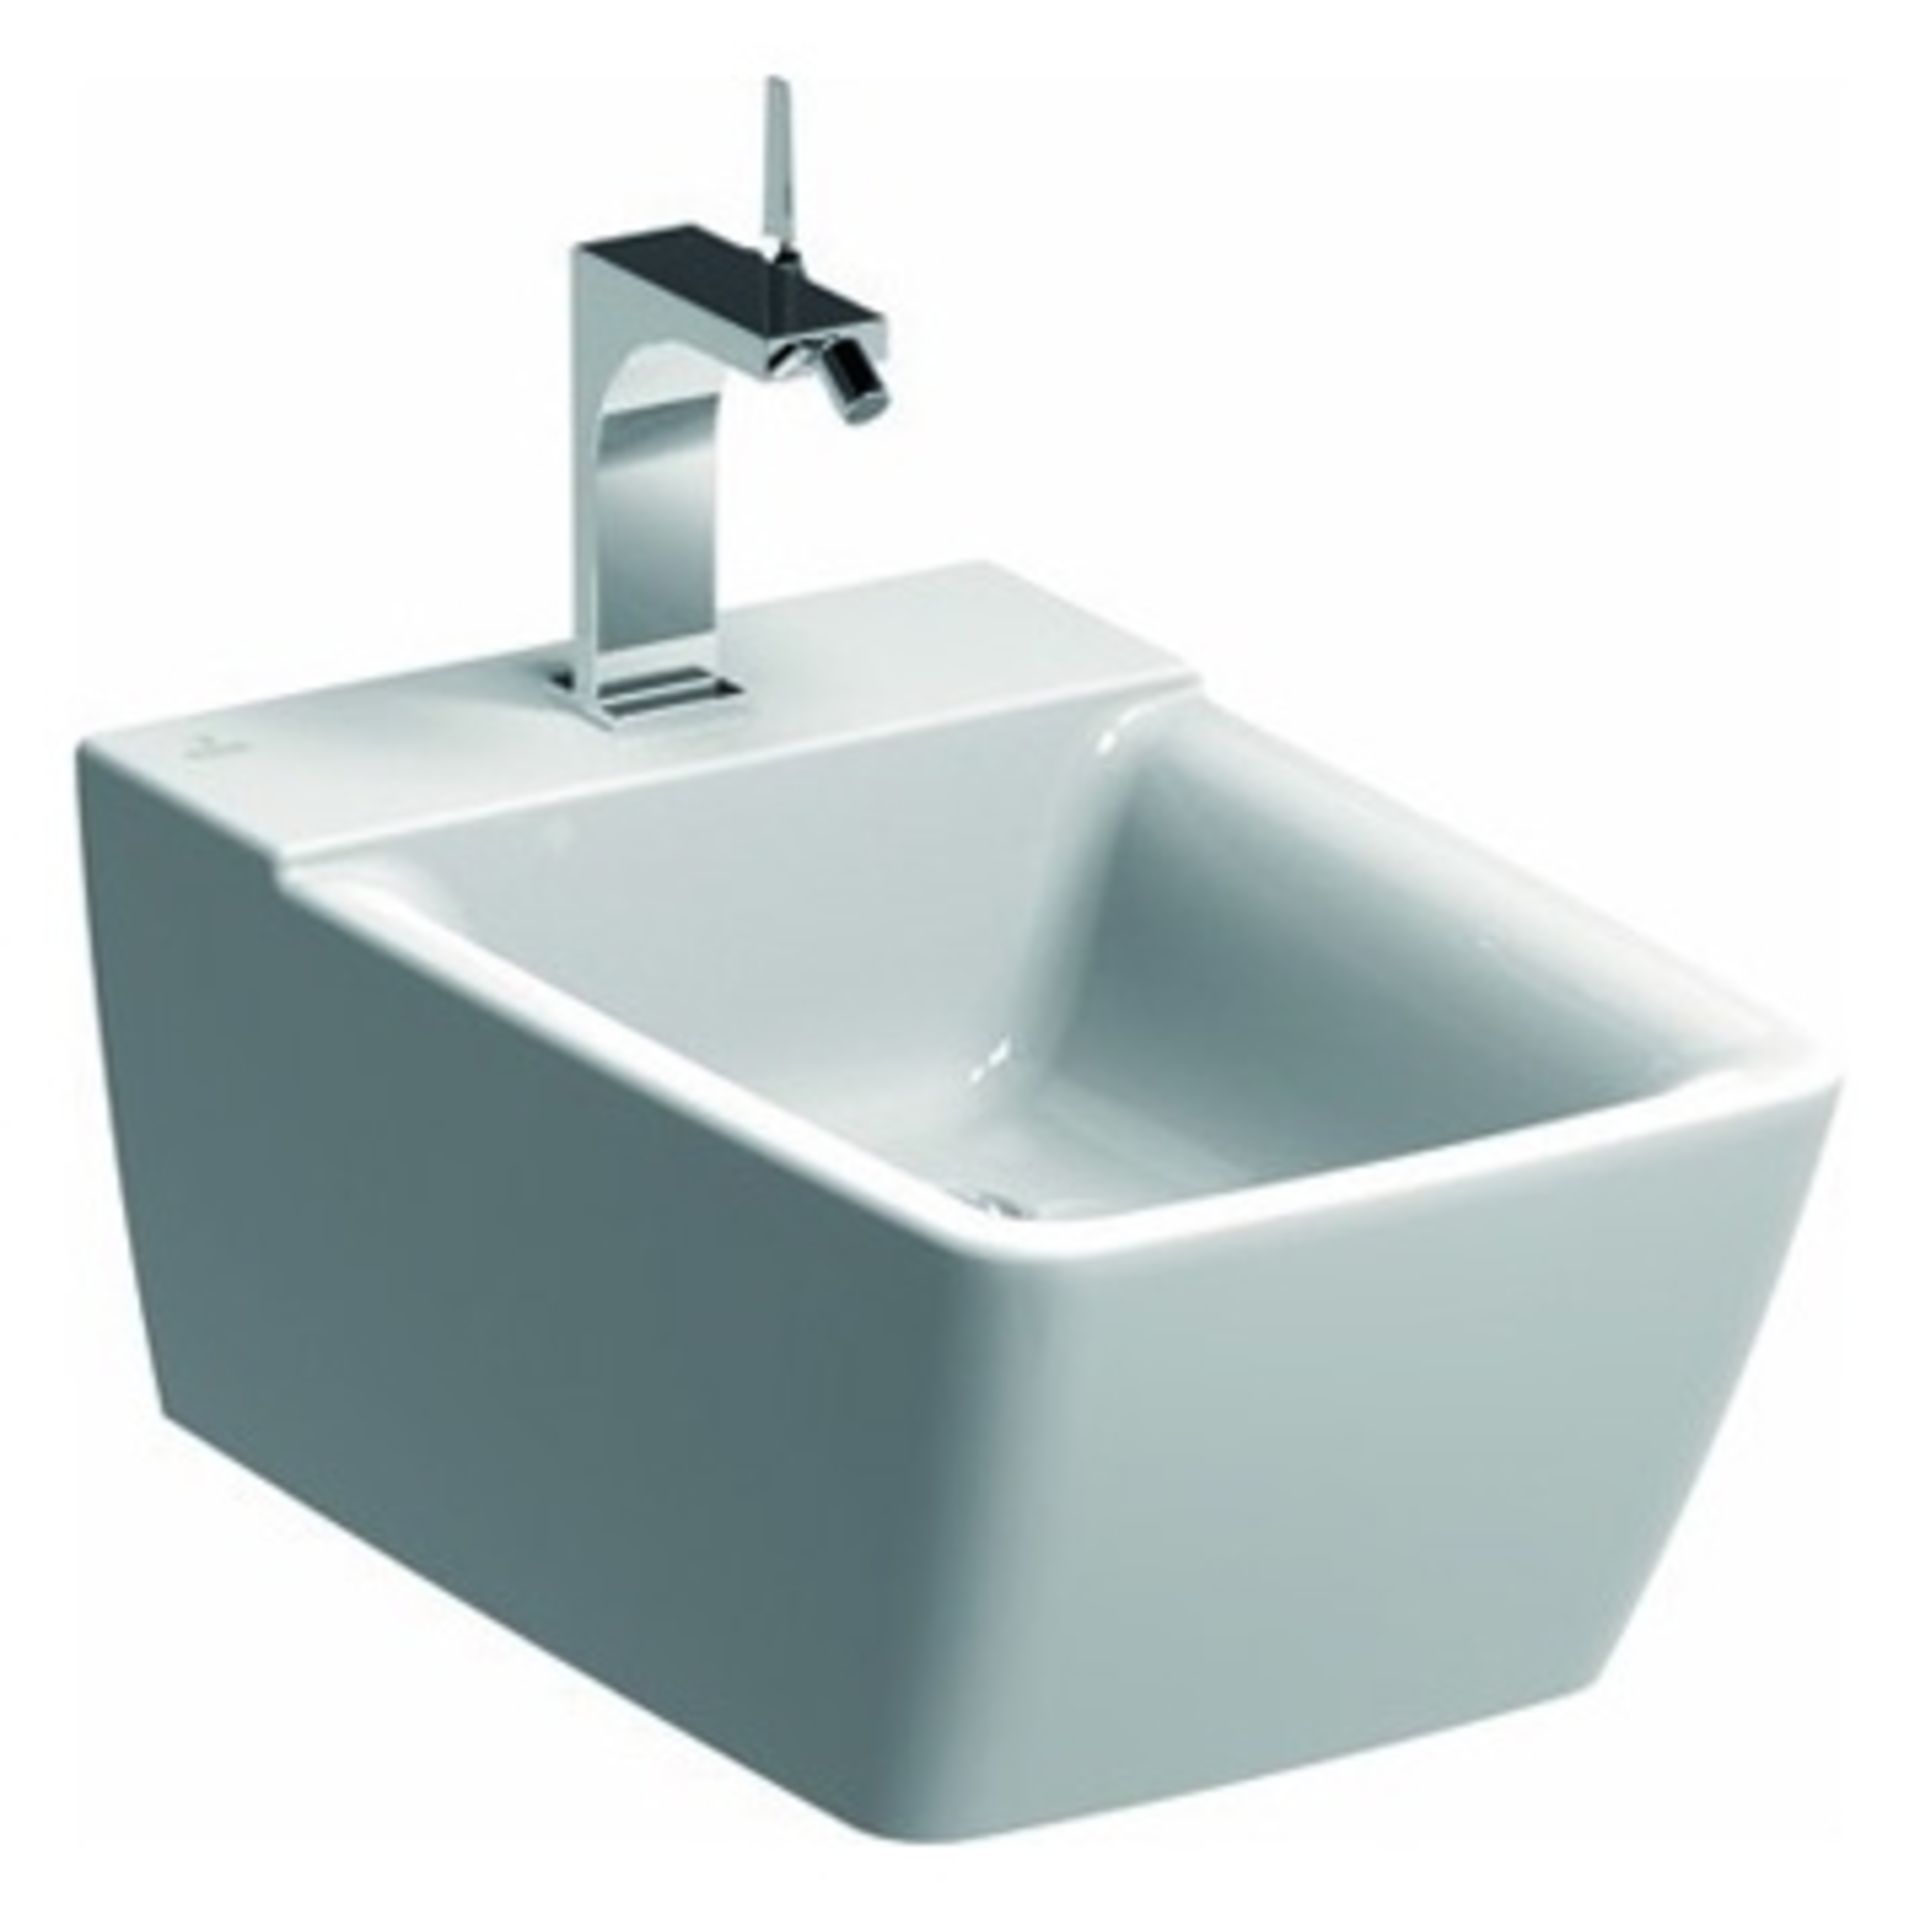 Brand New (XL56) Xeno 540mm Bidet Wall Hung. RRP £389.99.A premium bathroom series of products with - Image 2 of 3